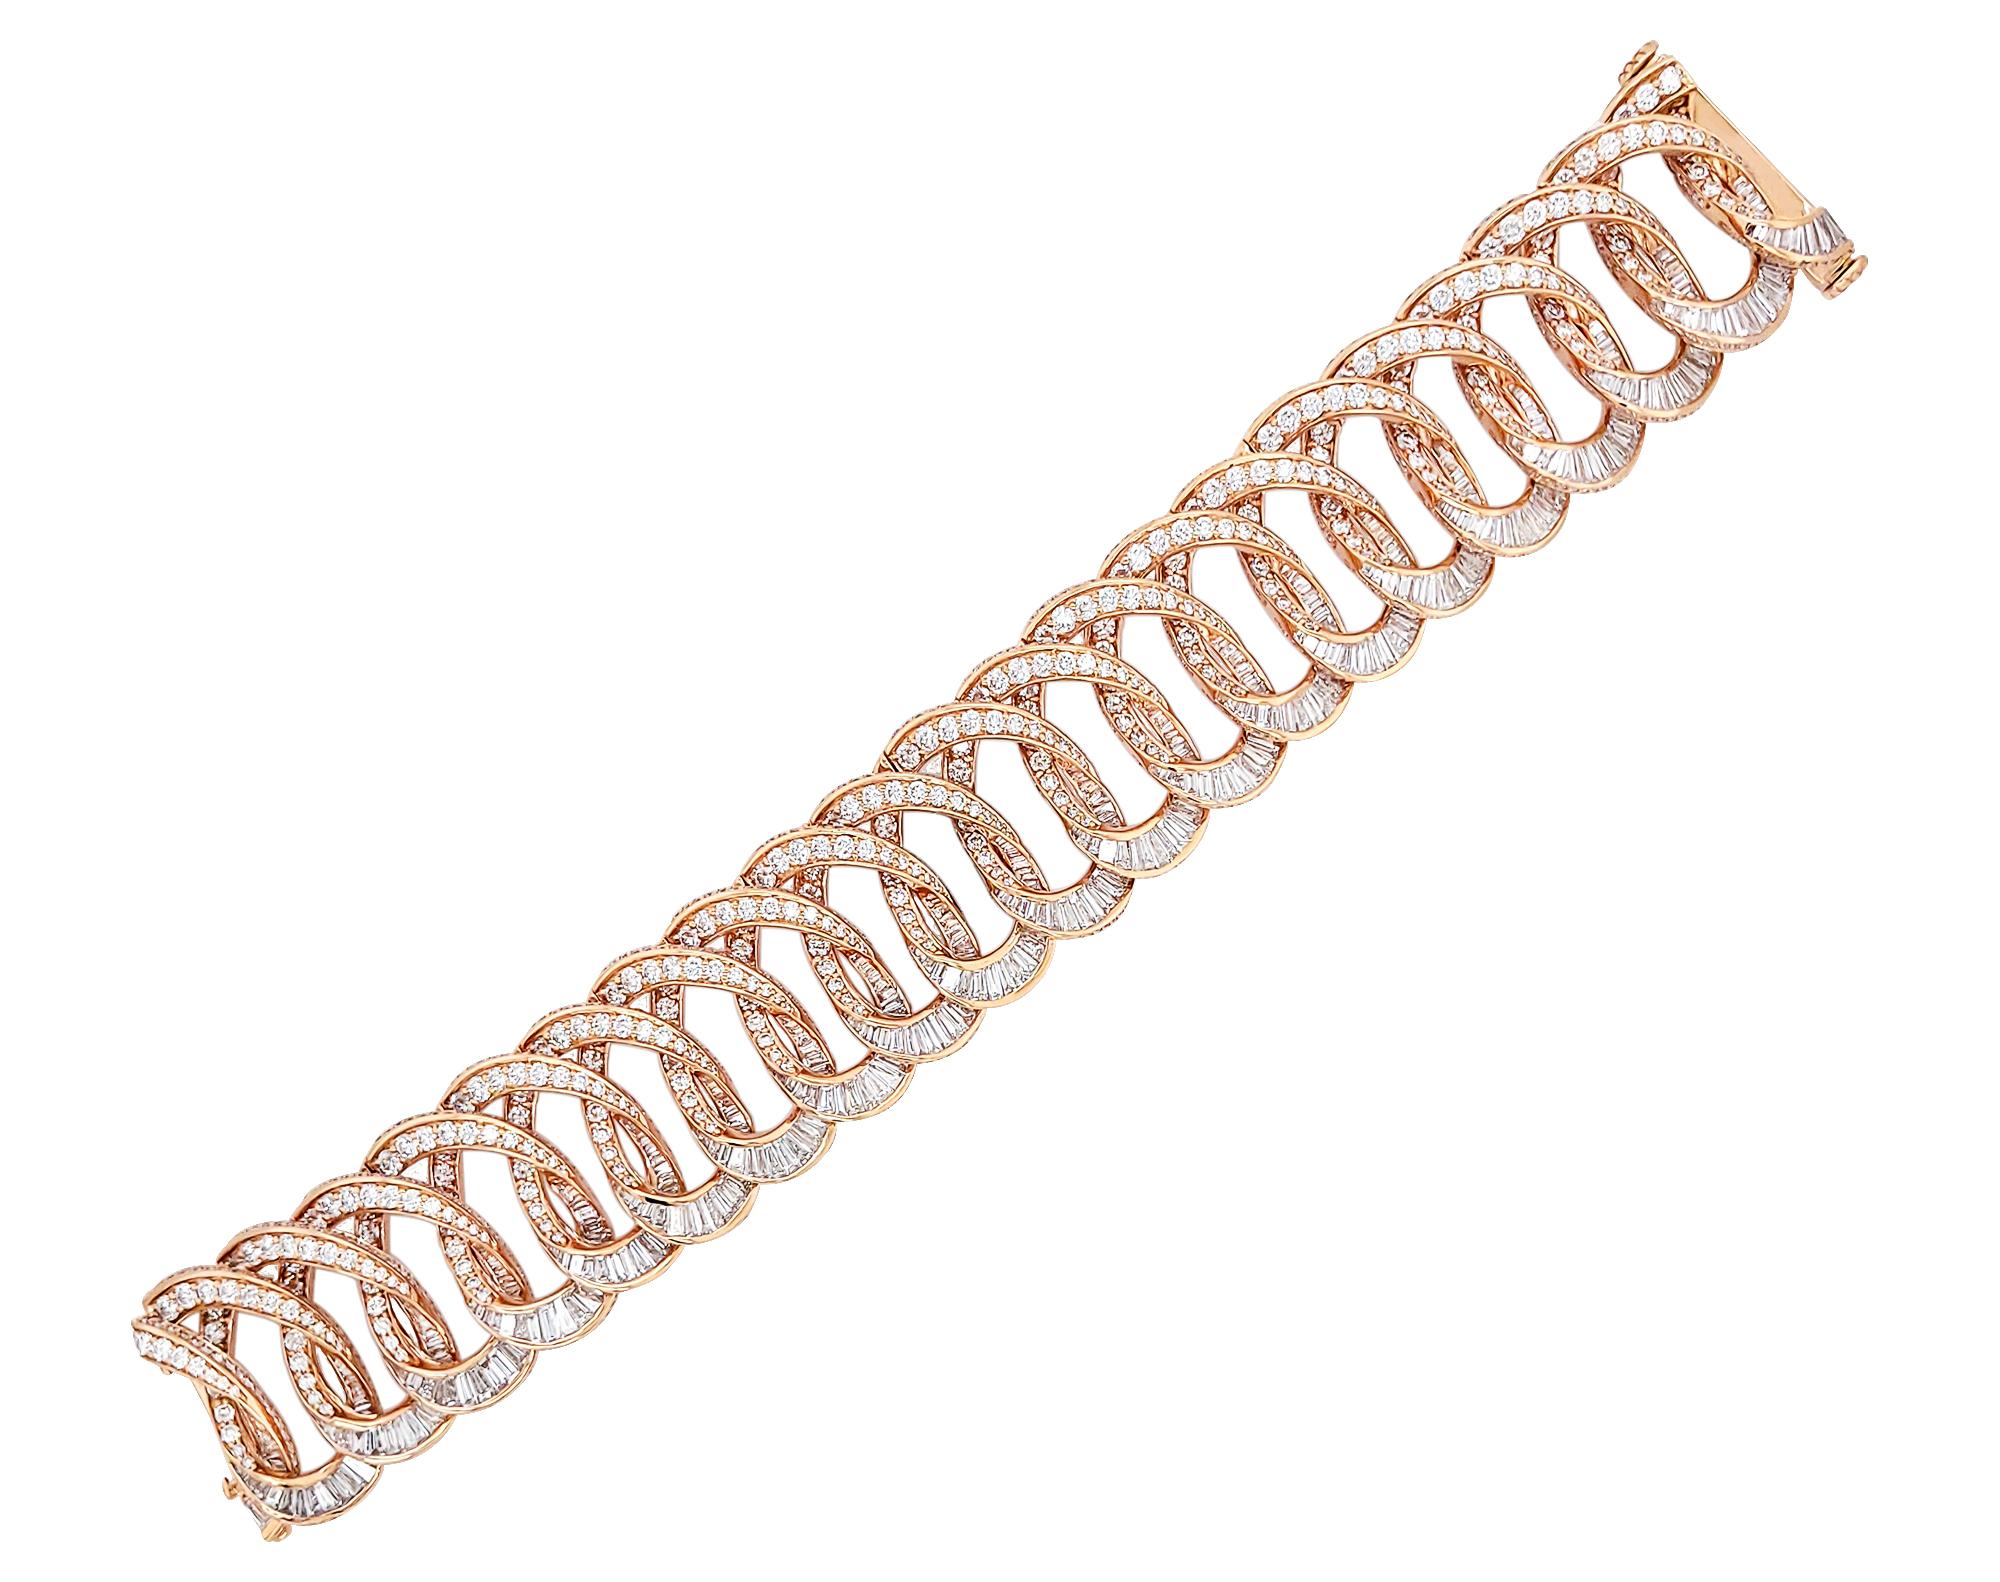 A stunning bracelet designed as links, decorated with diamonds and mounted in 18K rose gold.

Diamonds breakdown:
178 baguette diamonds weighing 3.08 carats
1,562 round diamonds weighing 17.97 carats
277 tapered baguette diamonds weighing 10.28